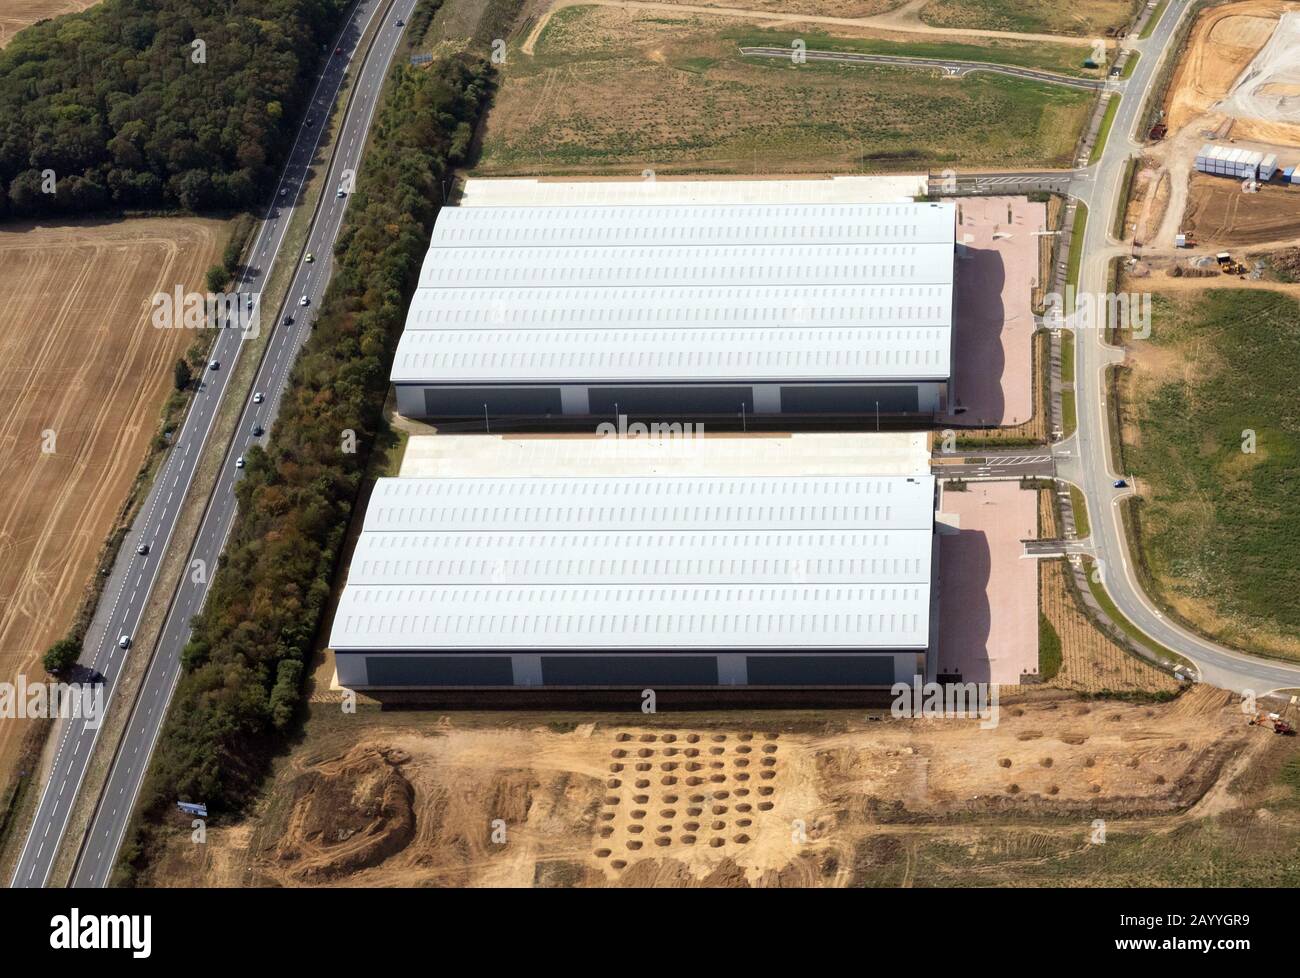 NHS Supply Chain Logistics warehouse in lower half of image in Suffolk, near Bury St Edmunds, UK Stock Photo